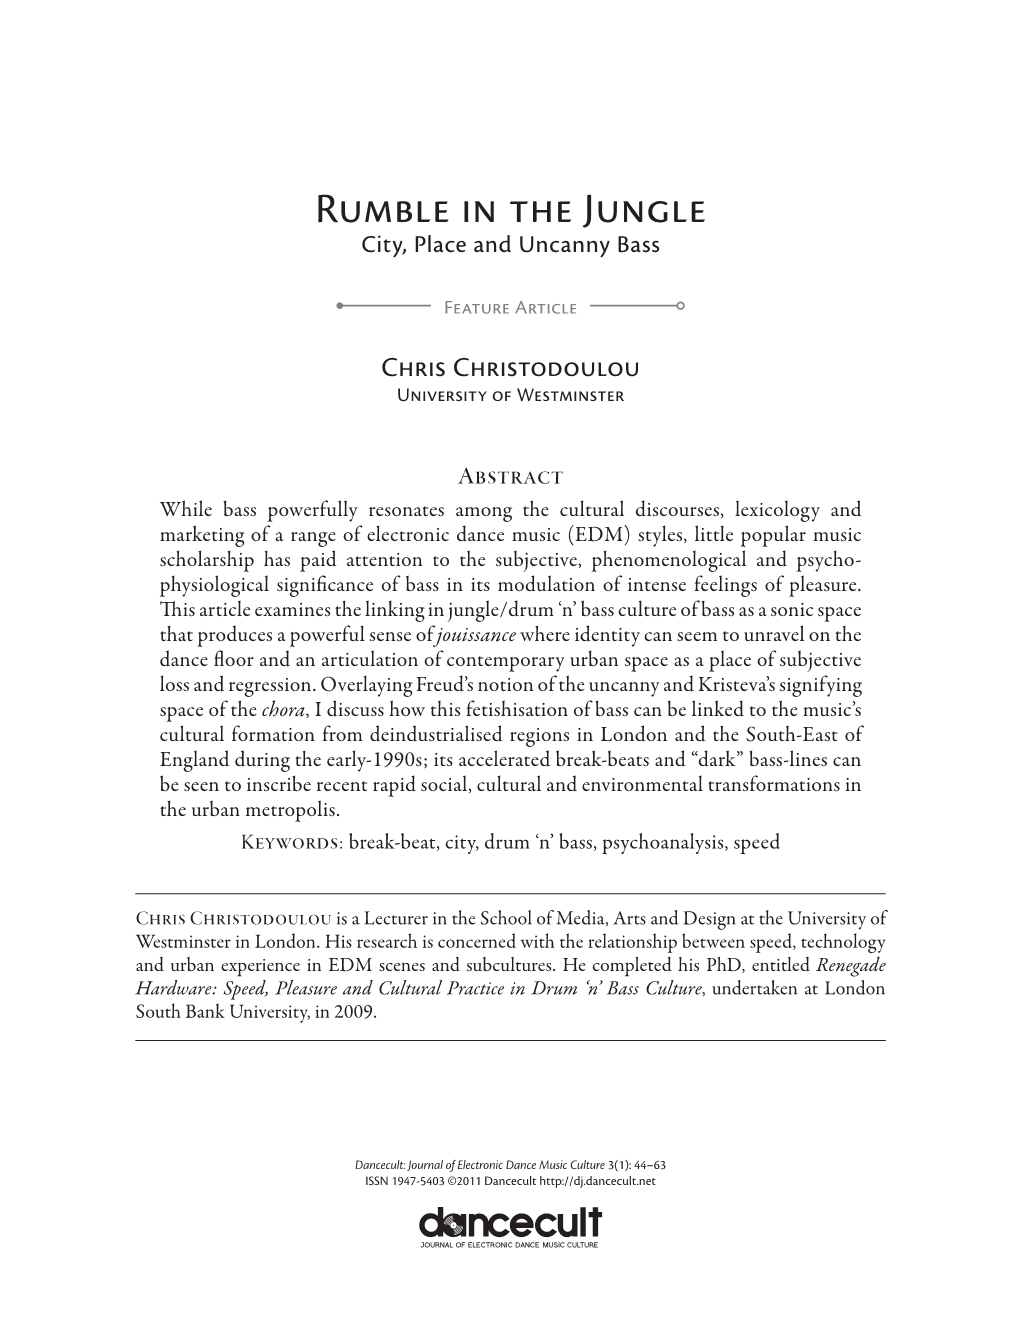 Rumble in the Jungle: City, Place and Uncanny Bass